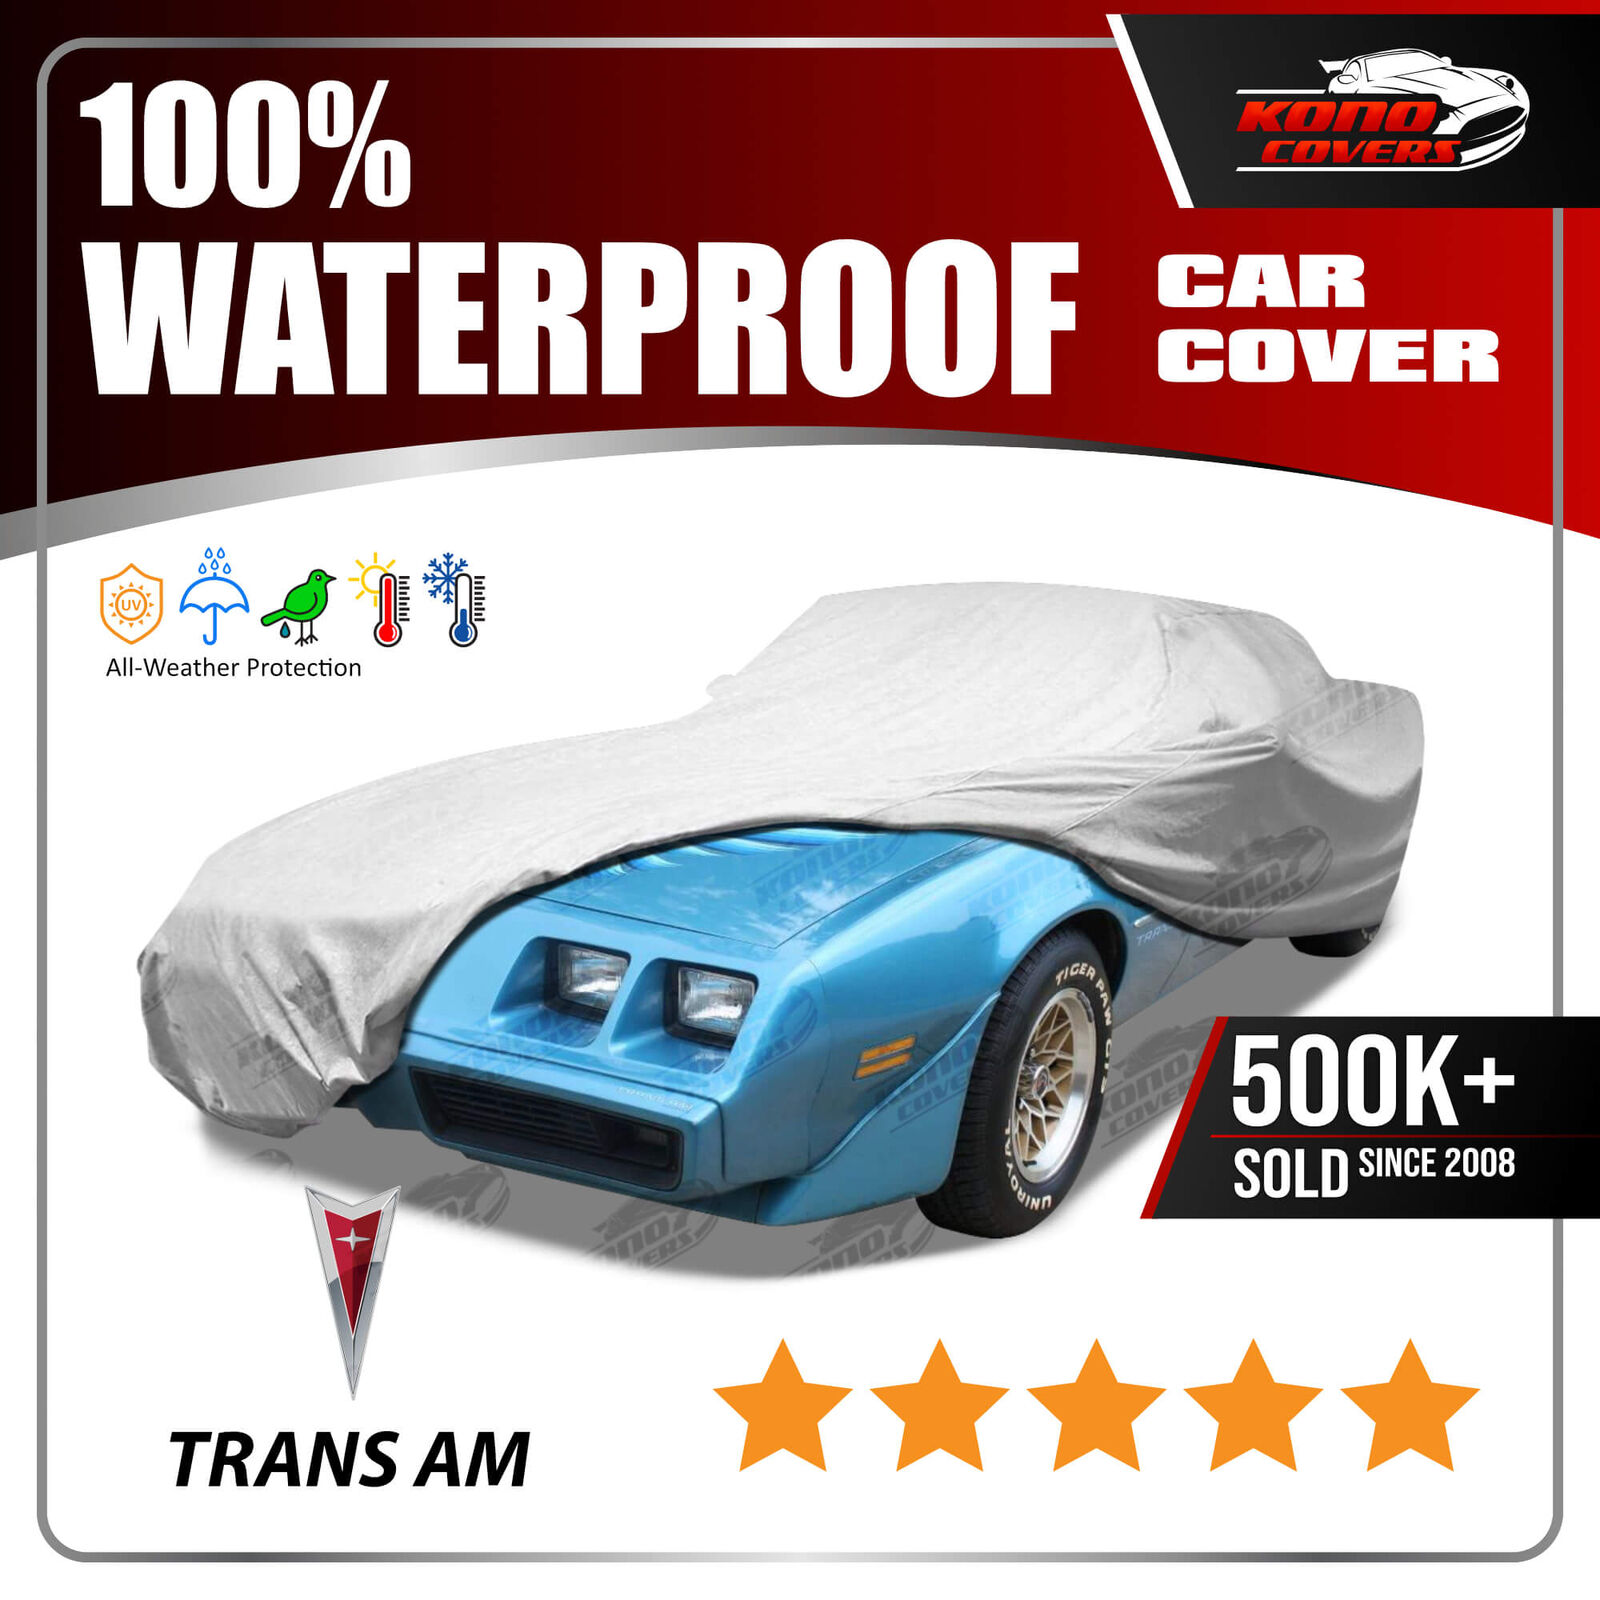 Pontiac Trans Am Silver Anniversary 1979 CAR COVER - Protects from ALL-WEATHER